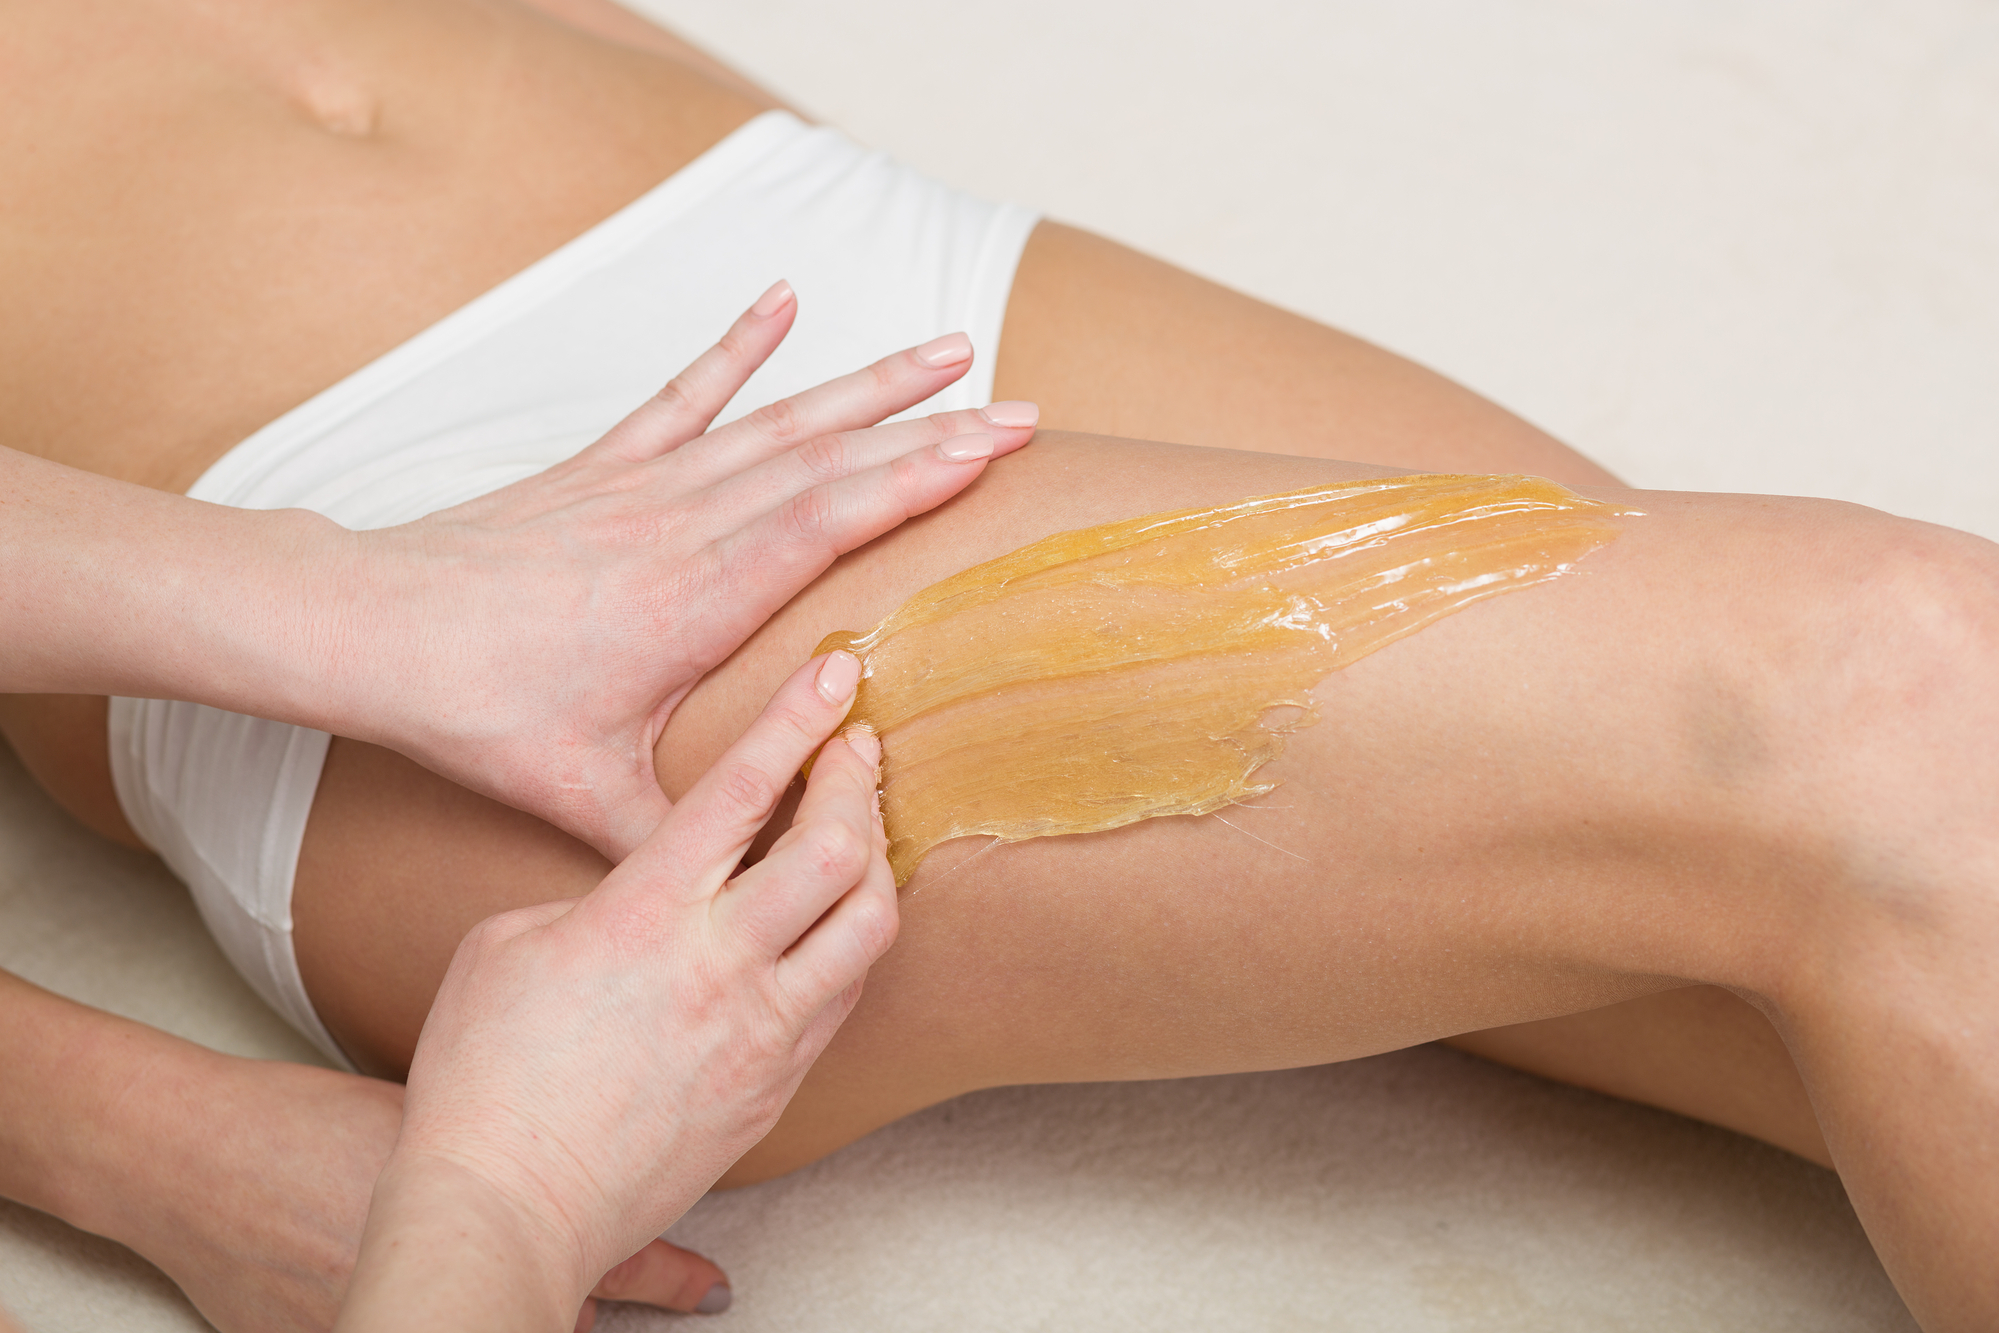 Is Sugaring Bad for You?